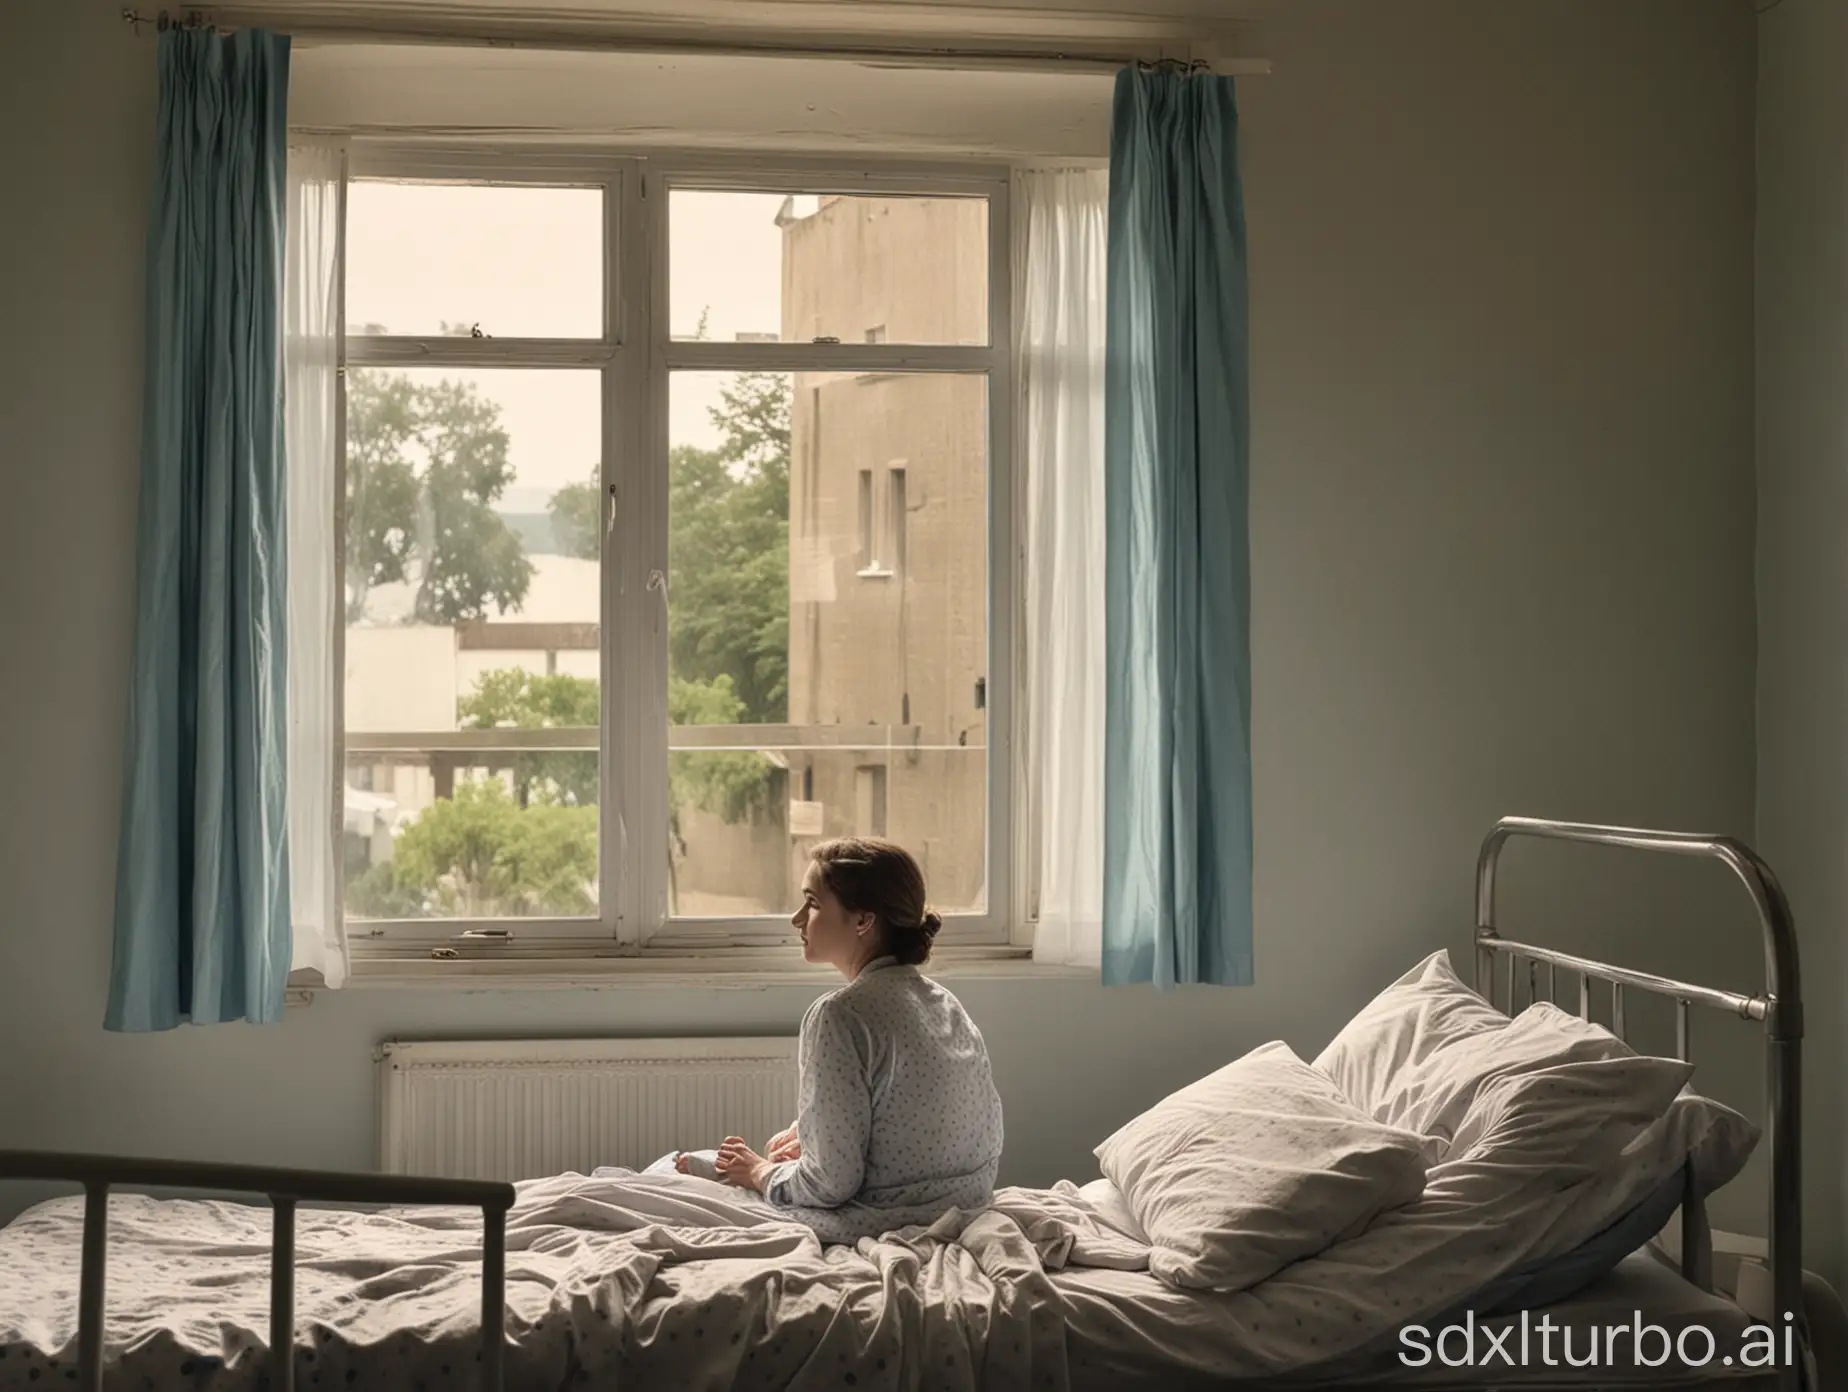 A lady sitting on a bed in a ward, watching out of the window.